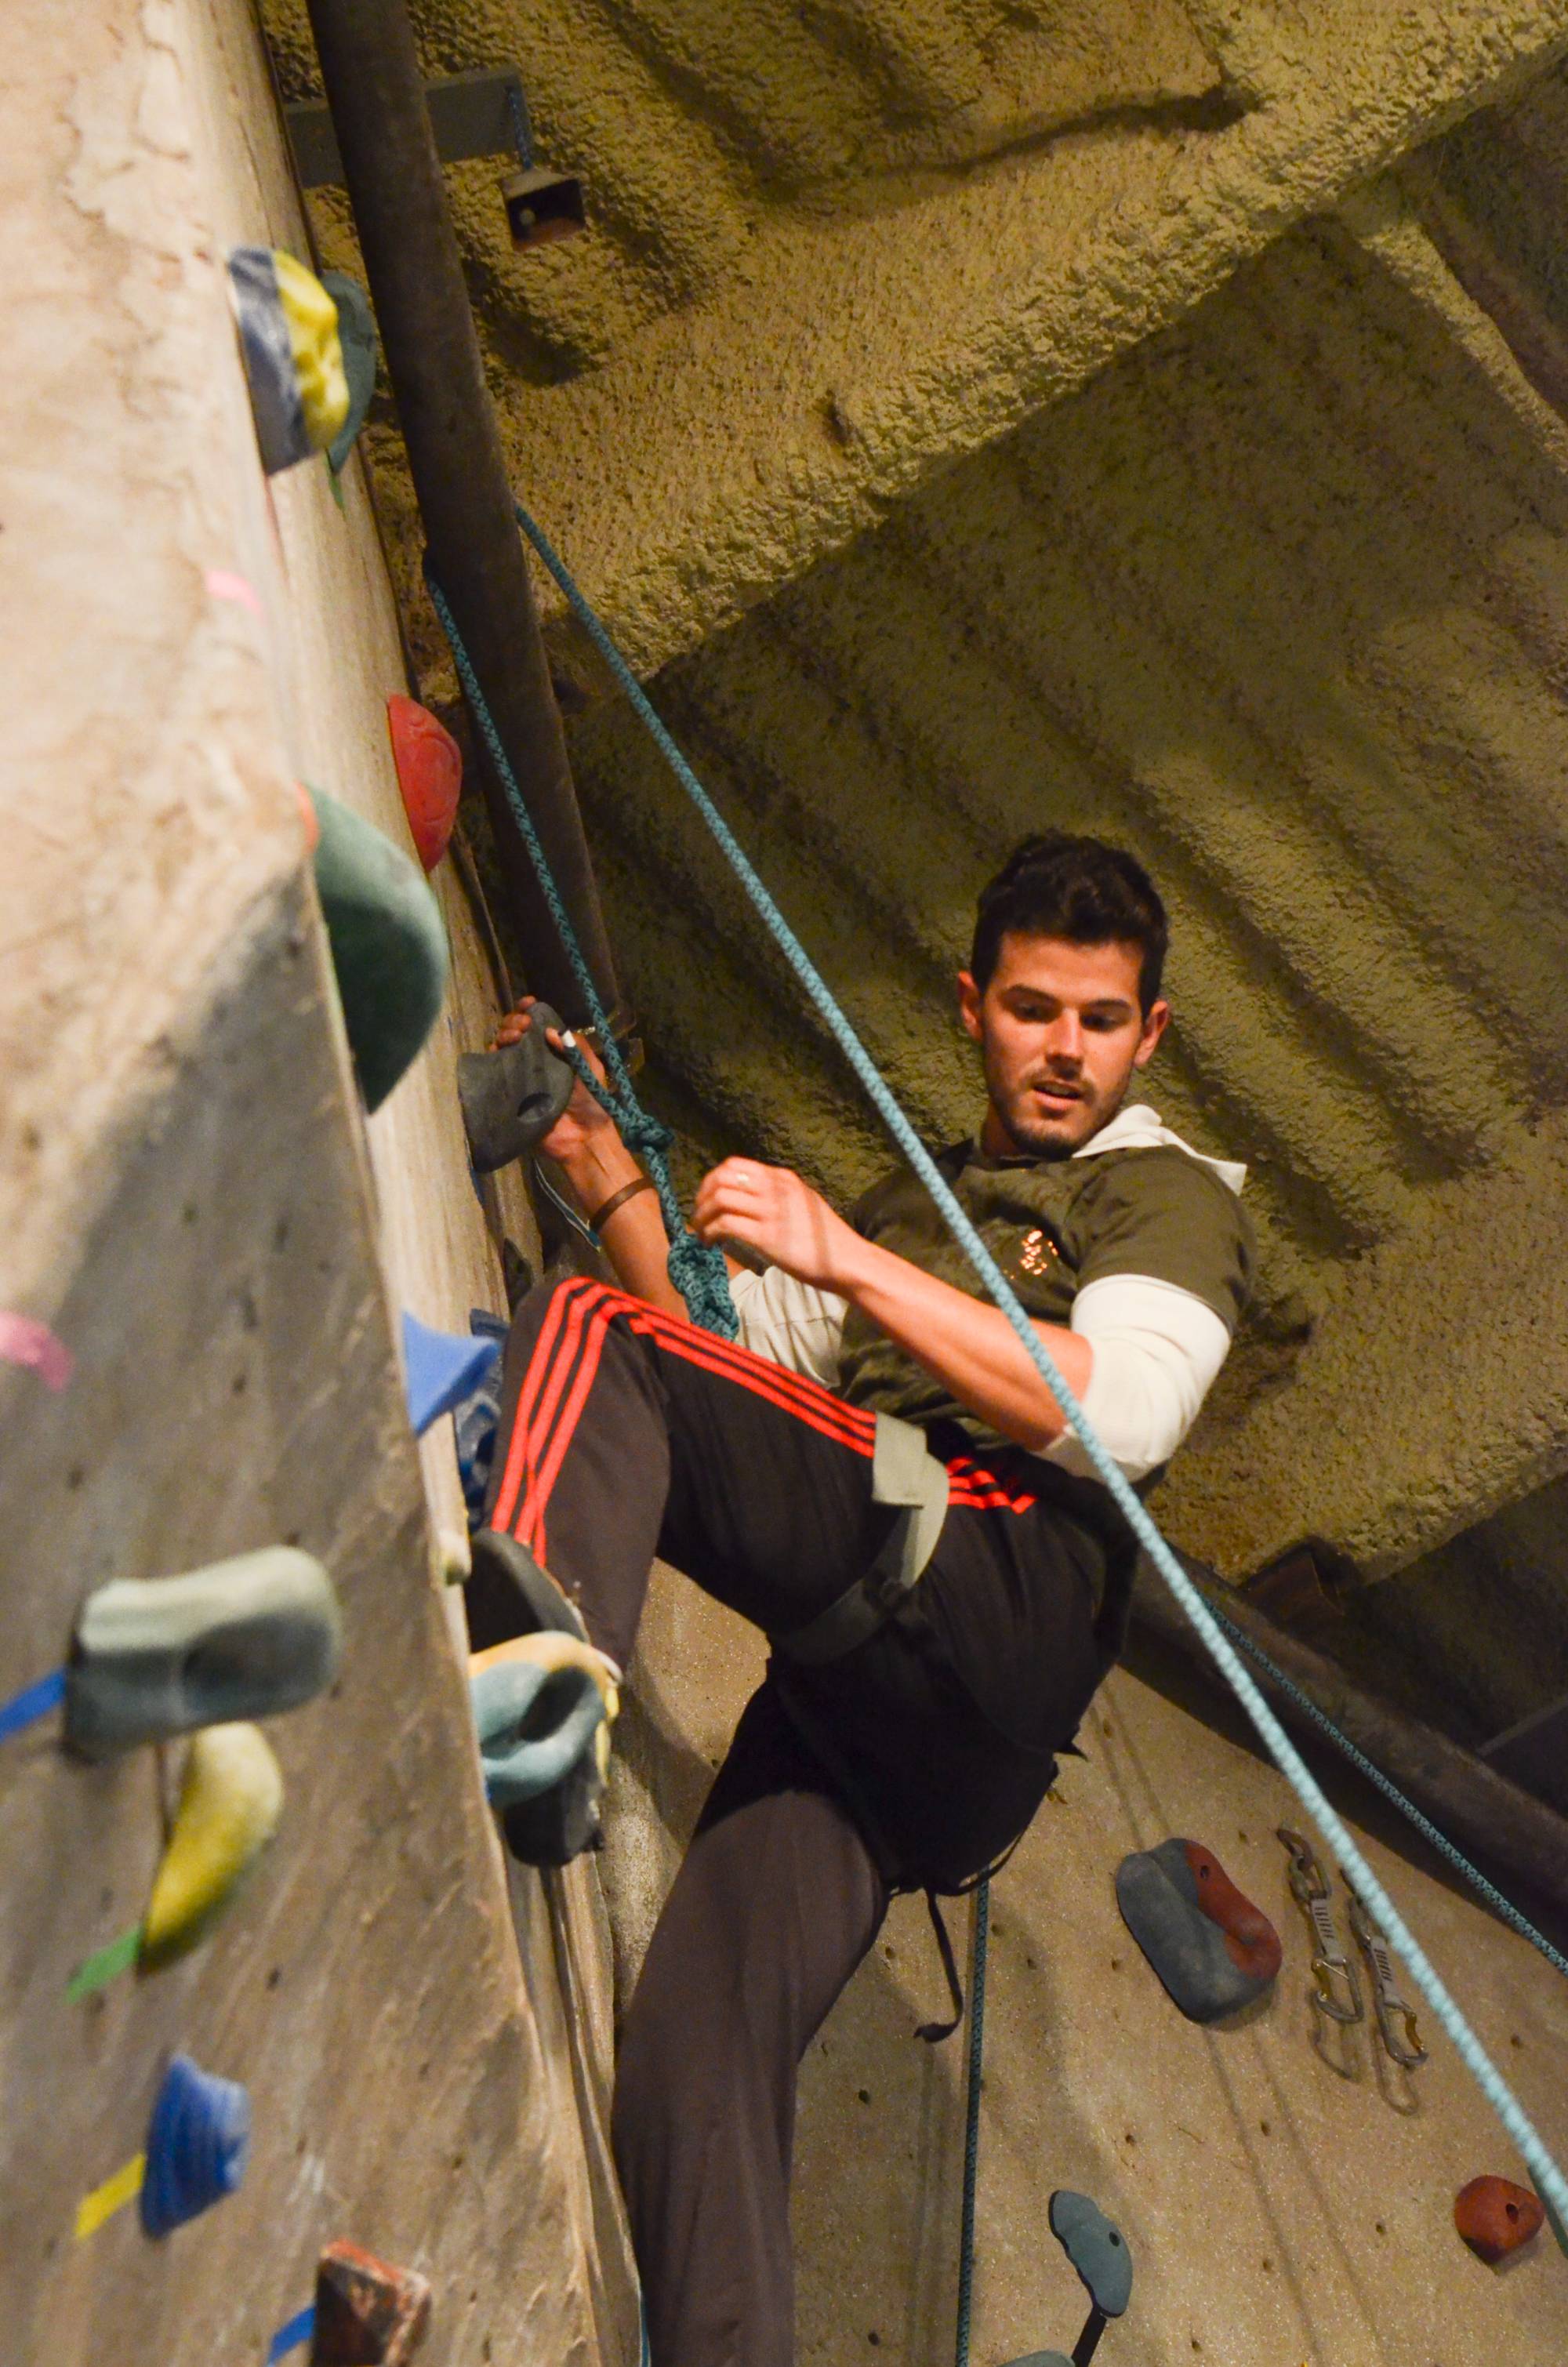 Young man on an indoor rock climbing wall